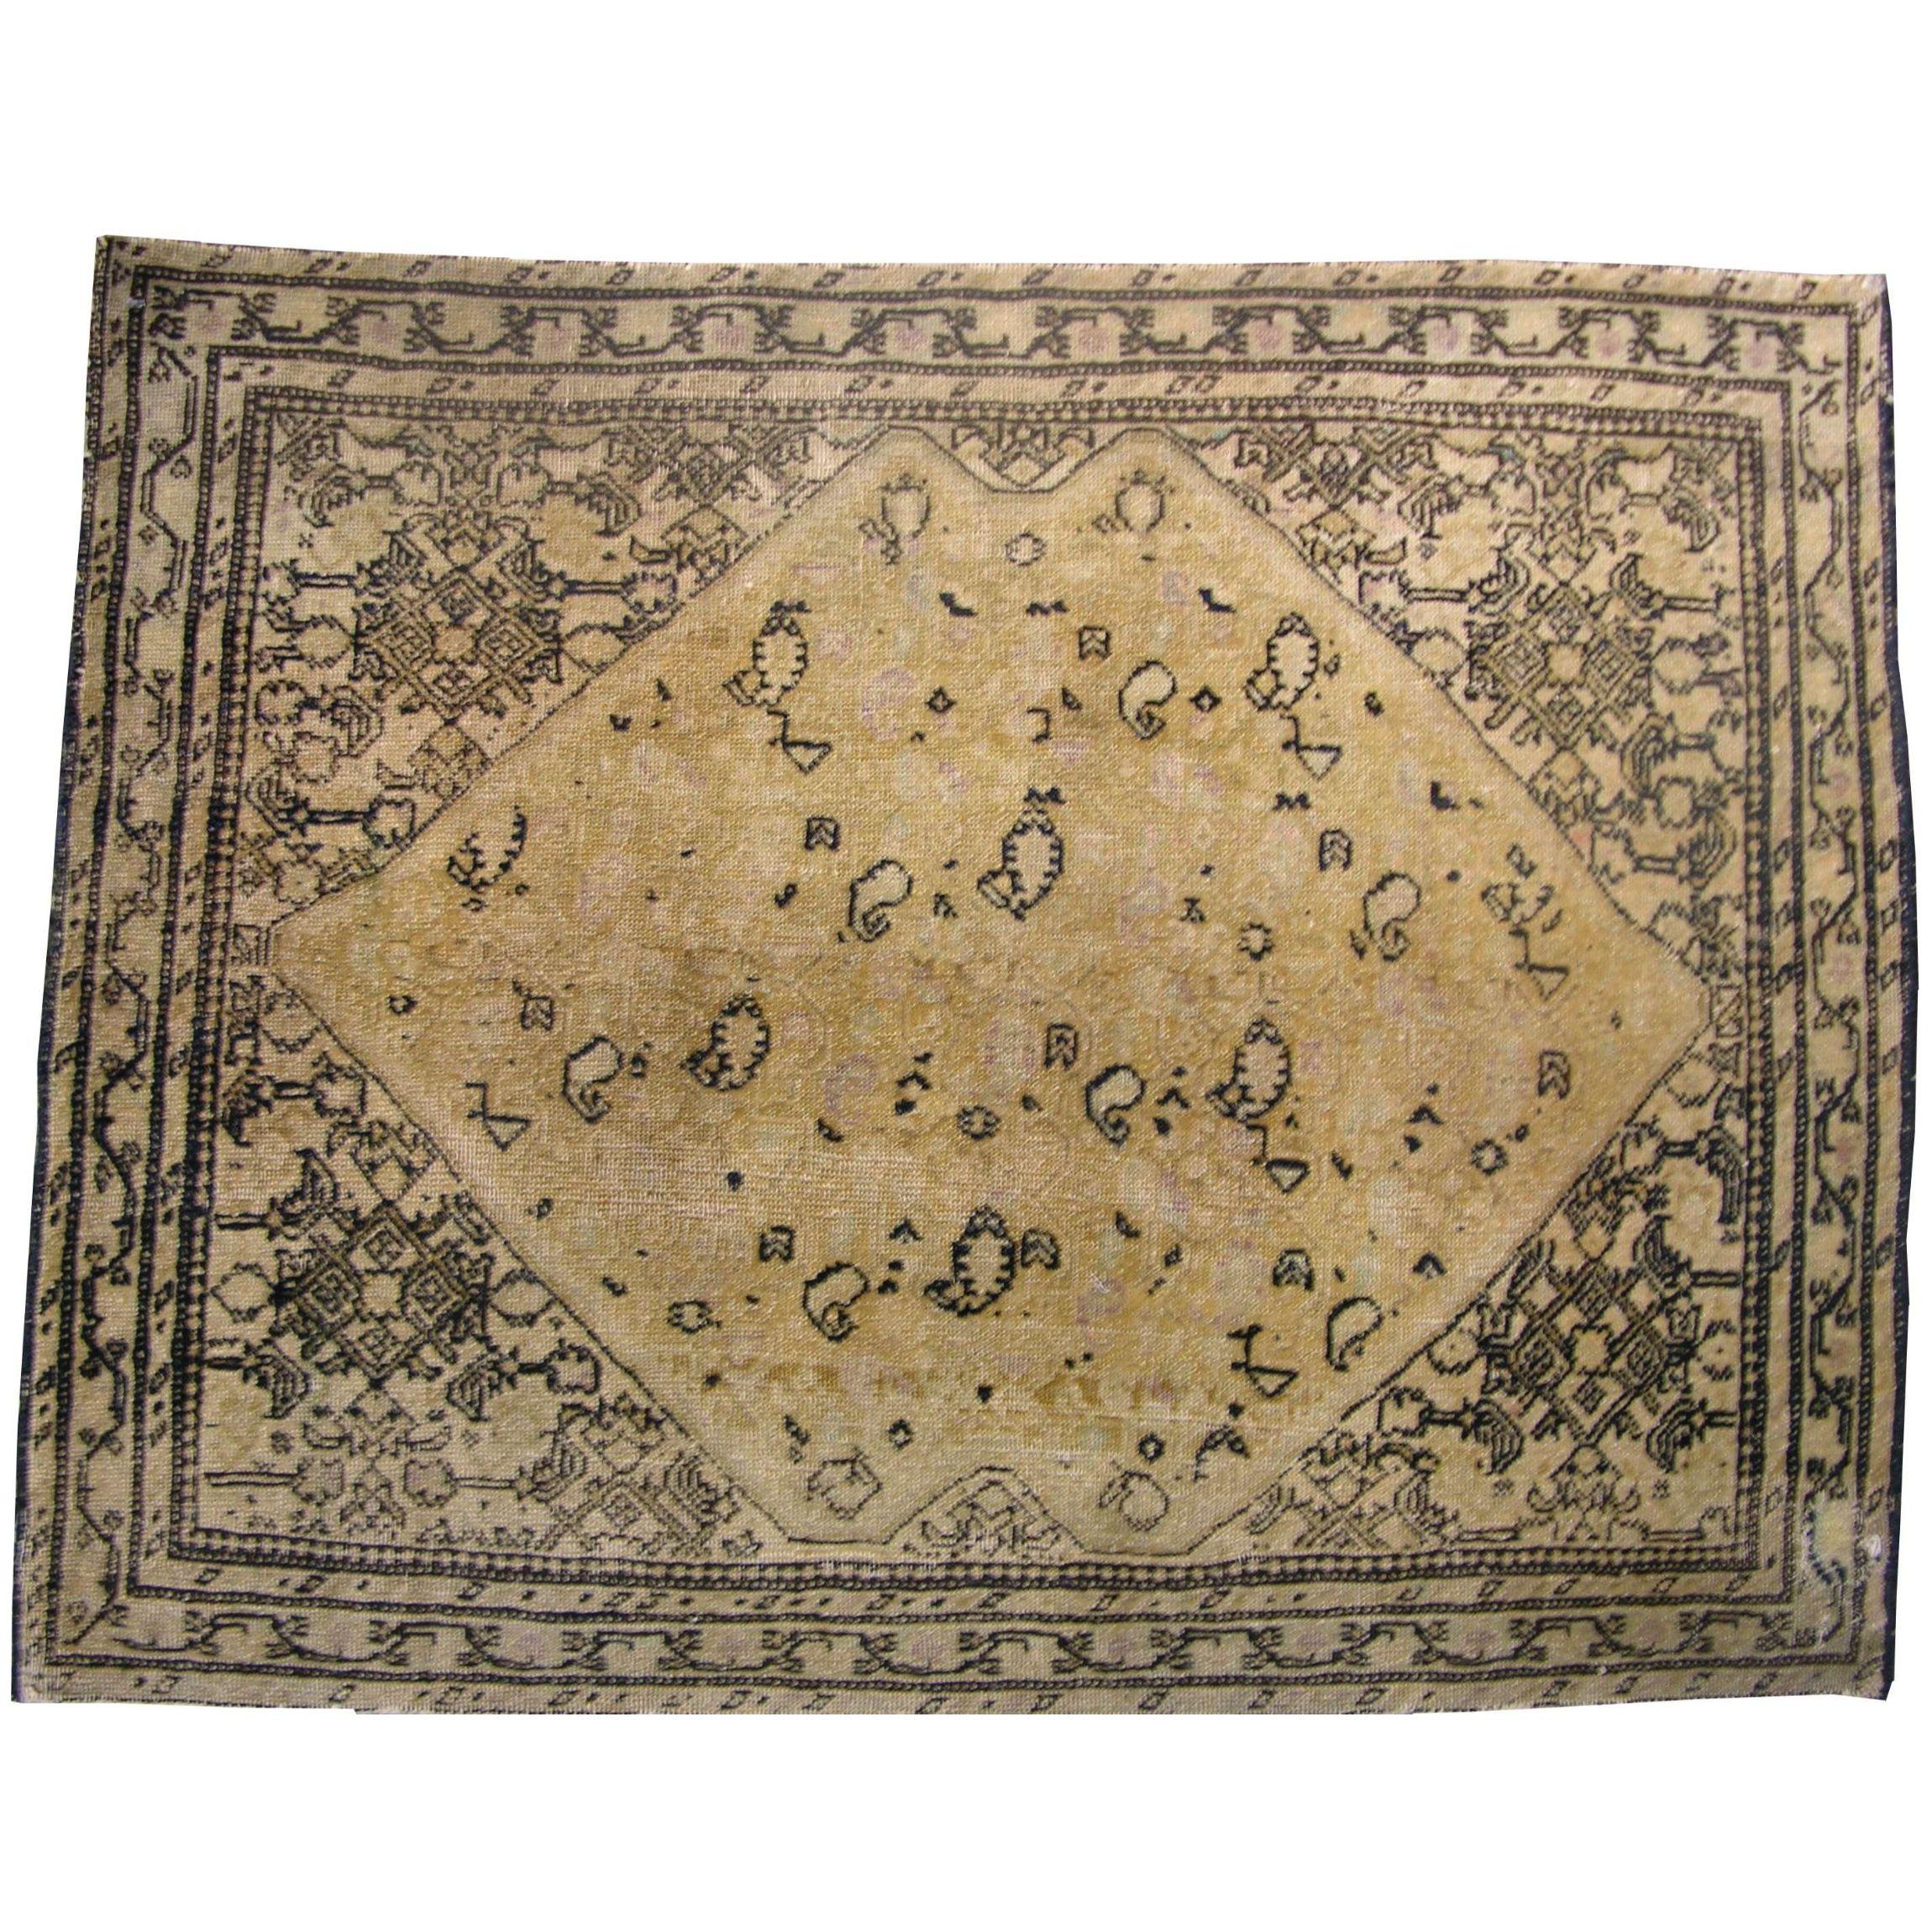 Antique Farahan Rug 2.10x2.3 In Good Condition For Sale In Los Angeles, US